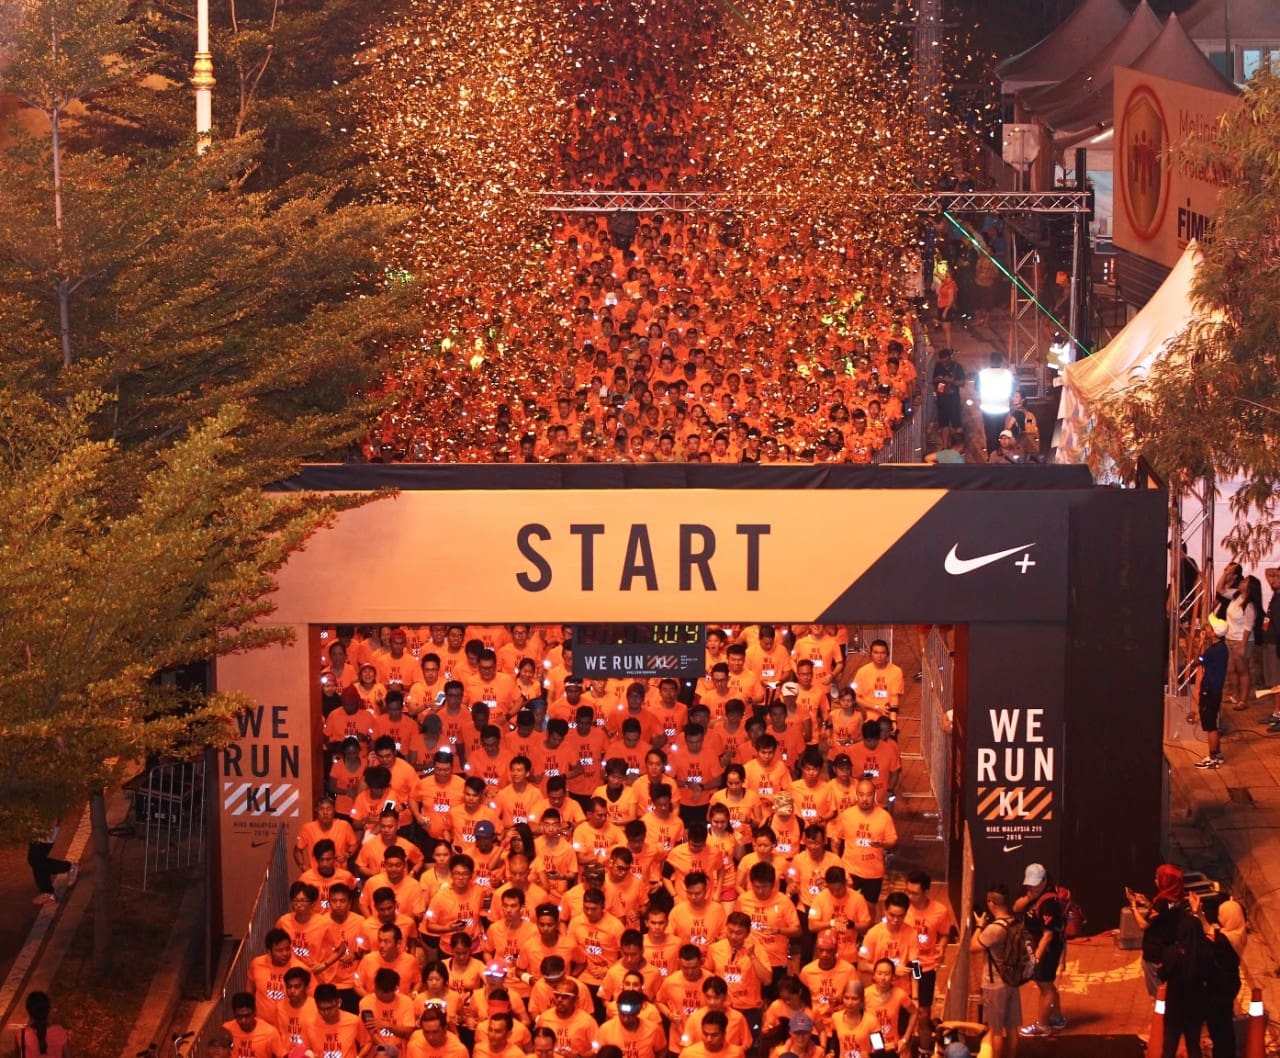 1. Nike WE RUN KL 21K sees 8,987 athletes take to the streets of Malaysia's capital